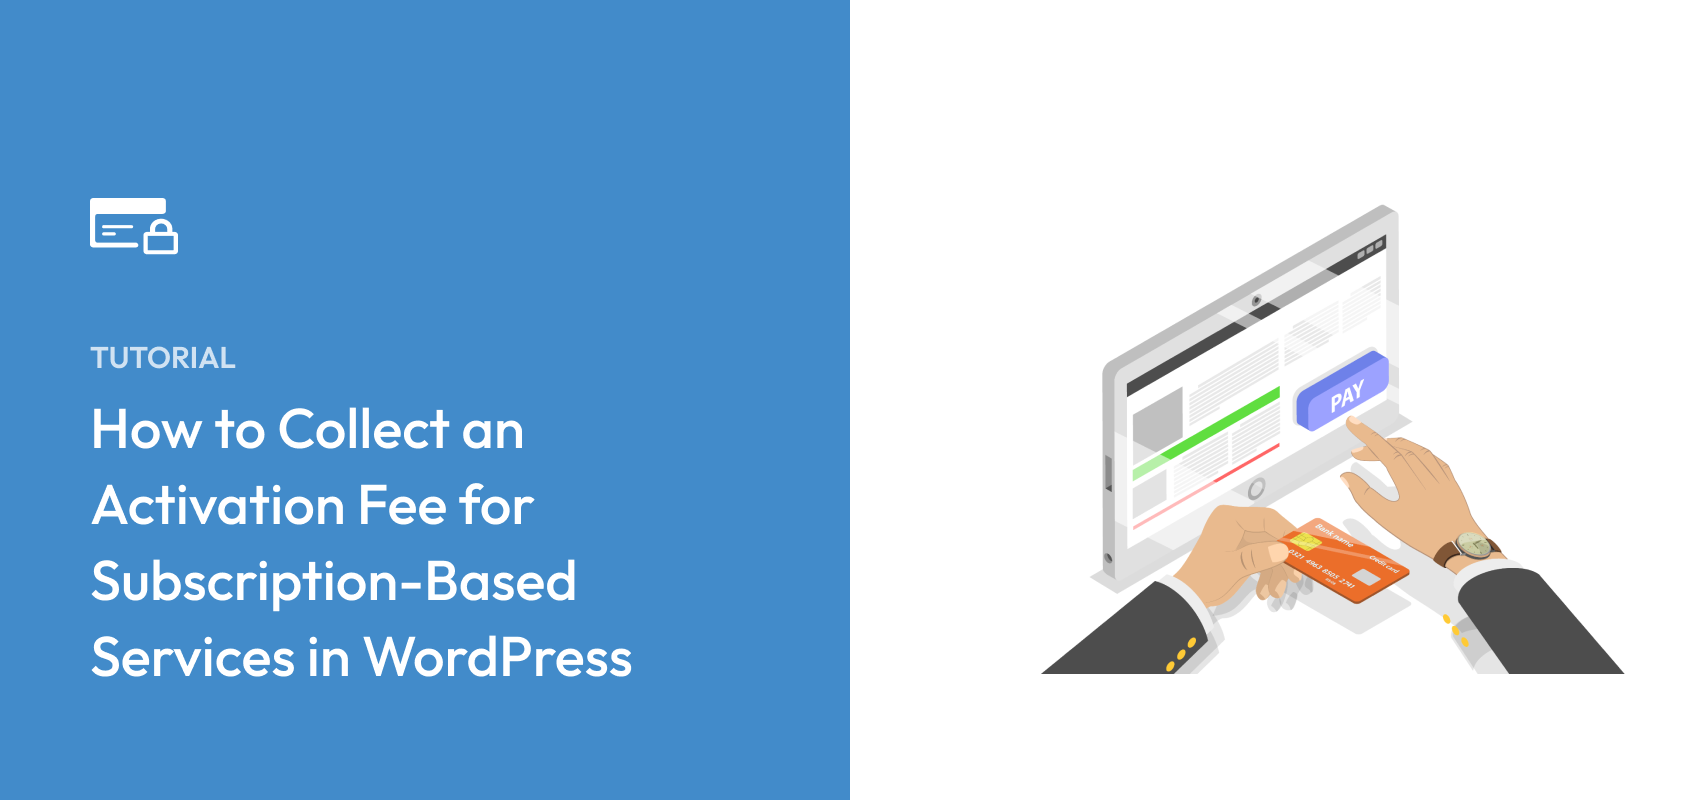 How to Collect an Activation Fee for Subscription-Based Services in WordPress